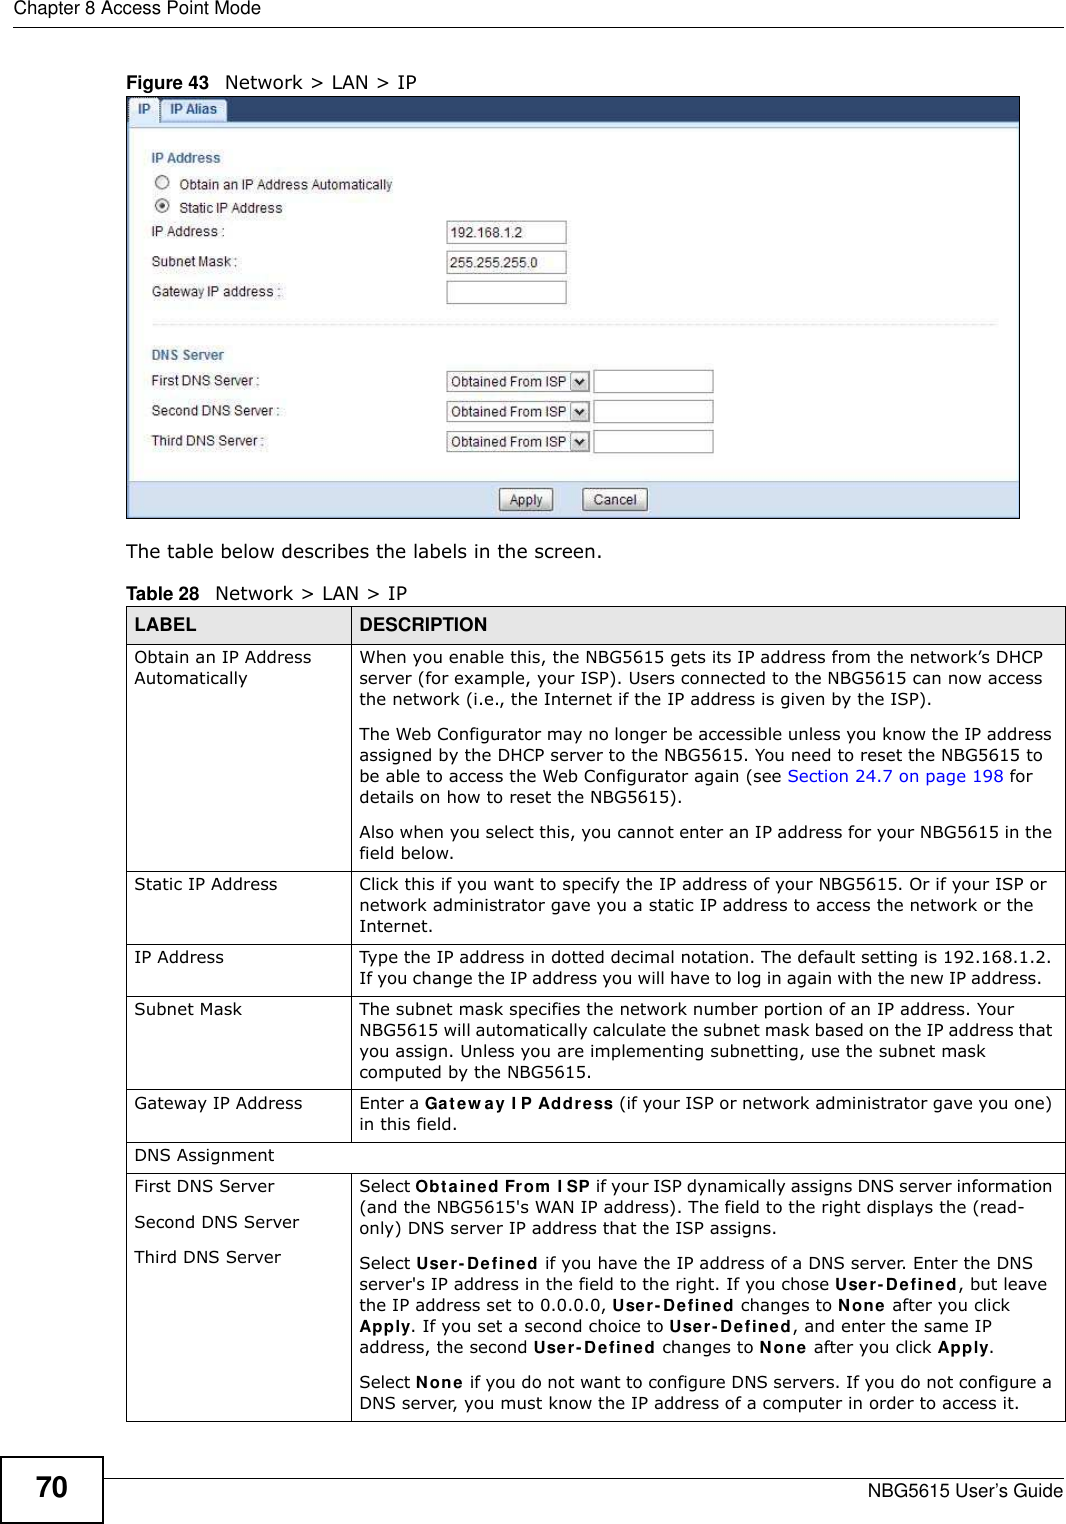 Chapter 8 Access Point ModeNBG5615 User’s Guide70Figure 43   Network &gt; LAN &gt; IP   The table below describes the labels in the screen.Table 28   Network &gt; LAN &gt; IPLABEL DESCRIPTIONObtain an IP Address AutomaticallyWhen you enable this, the NBG5615 gets its IP address from the network’s DHCP server (for example, your ISP). Users connected to the NBG5615 can now access the network (i.e., the Internet if the IP address is given by the ISP).The Web Configurator may no longer be accessible unless you know the IP address assigned by the DHCP server to the NBG5615. You need to reset the NBG5615 to be able to access the Web Configurator again (see Section 24.7 on page 198 for details on how to reset the NBG5615).Also when you select this, you cannot enter an IP address for your NBG5615 in the field below.Static IP Address Click this if you want to specify the IP address of your NBG5615. Or if your ISP or network administrator gave you a static IP address to access the network or the Internet.IP Address Type the IP address in dotted decimal notation. The default setting is 192.168.1.2. If you change the IP address you will have to log in again with the new IP address.   Subnet Mask The subnet mask specifies the network number portion of an IP address. Your NBG5615 will automatically calculate the subnet mask based on the IP address that you assign. Unless you are implementing subnetting, use the subnet mask computed by the NBG5615.Gateway IP Address Enter a Gatew ay I P Address (if your ISP or network administrator gave you one) in this field.DNS AssignmentFirst DNS ServerSecond DNS ServerThird DNS Server Select Obtained From  I SP if your ISP dynamically assigns DNS server information (and the NBG5615&apos;s WAN IP address). The field to the right displays the (read-only) DNS server IP address that the ISP assigns. Select User-Defined if you have the IP address of a DNS server. Enter the DNS server&apos;s IP address in the field to the right. If you chose User- Defined, but leave the IP address set to 0.0.0.0, User- Defined changes to None after you click Apply. If you set a second choice to User- Defined, and enter the same IP address, the second User-Defined changes to None after you click Apply. Select None if you do not want to configure DNS servers. If you do not configure a DNS server, you must know the IP address of a computer in order to access it.